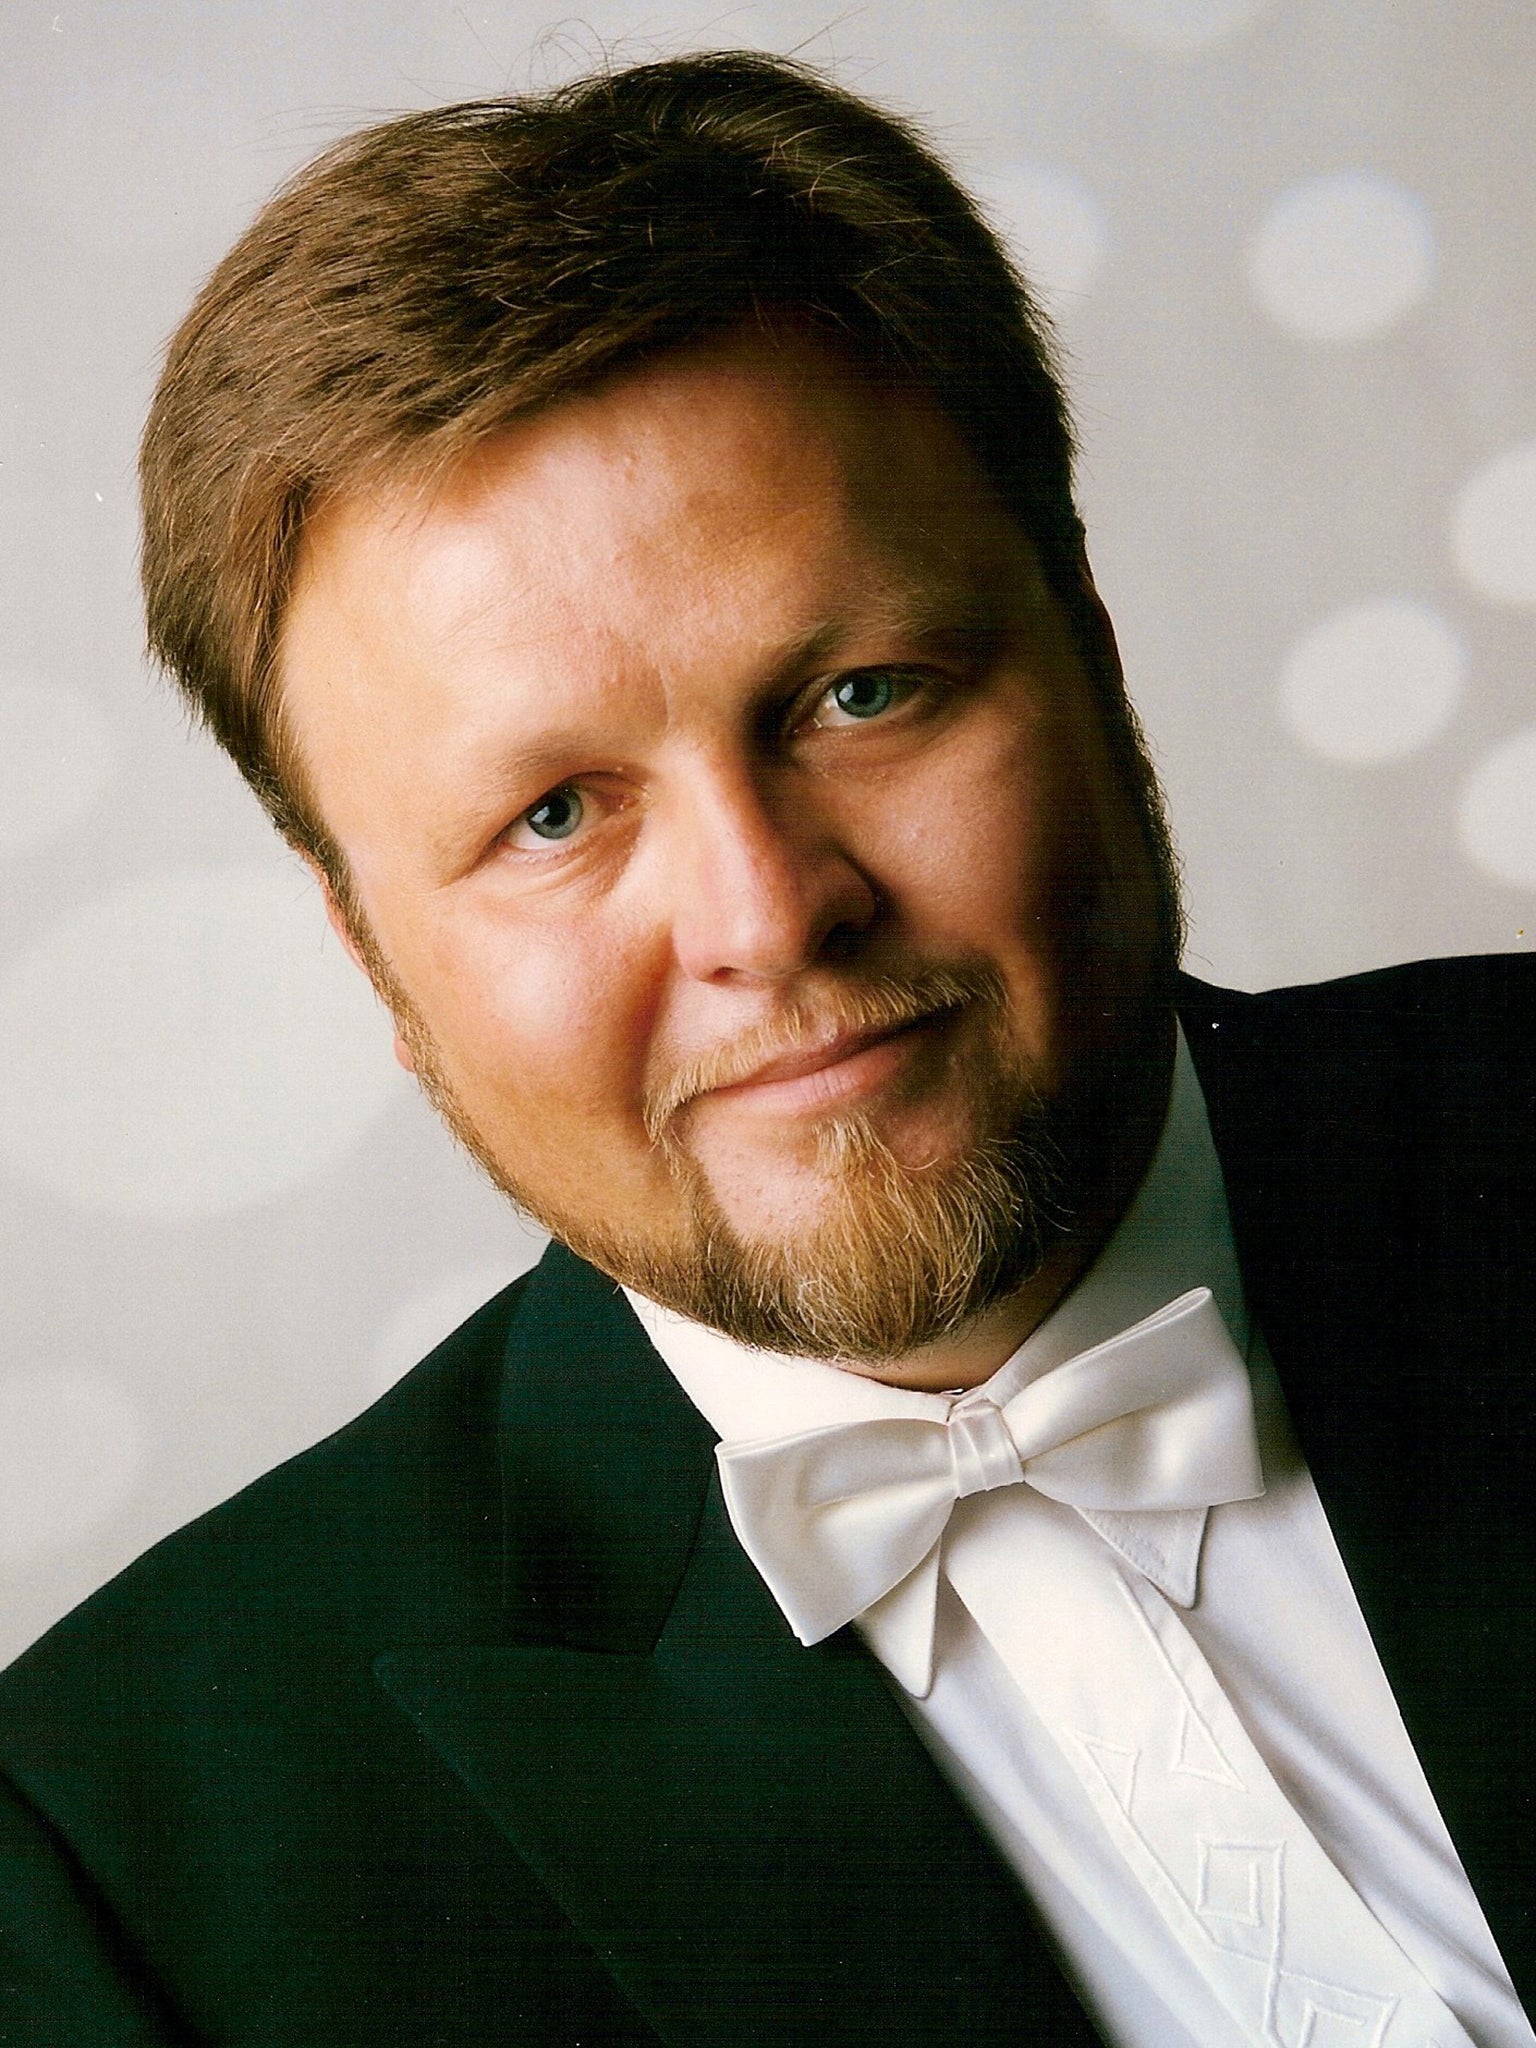 Bryjak: he was due to perform at the Bayreuth Festival
later this year